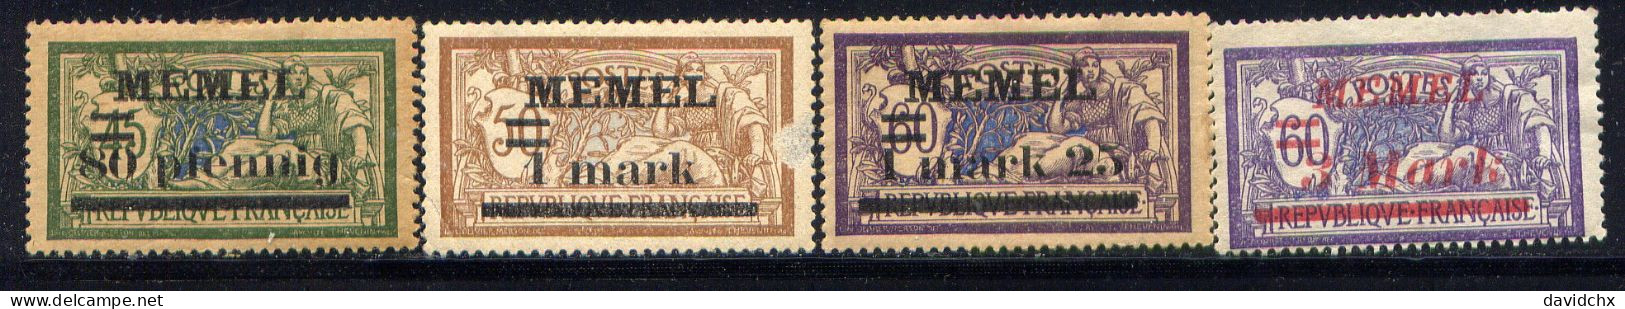 MEMEL, NO.'S 25, 26, 27, AND 40, MH - Europe (Other)